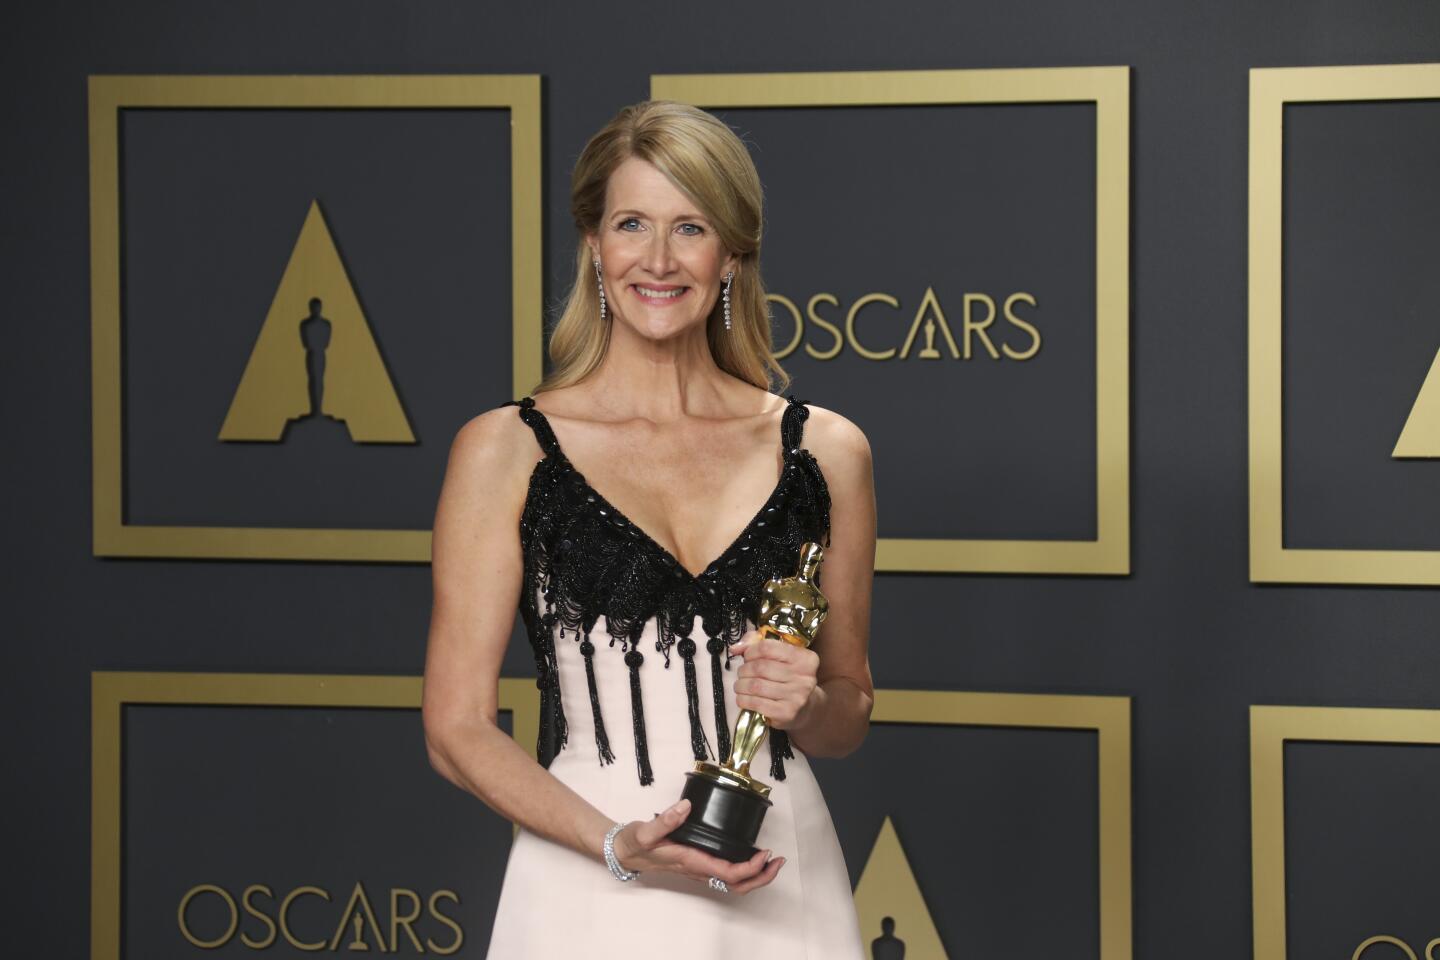 HOLLYWOOD, CA – February 9, 2020: Laura Dern winner of the supporting actress Oscar for “Marriage Story”in the Photo Room at the 92nd Academy Awards on Sunday, February 9, 2020 at the Dolby Theatre at Hollywood & Highland Center in Hollywood, CA. (Allen J. Schaben / Los Angeles Times)